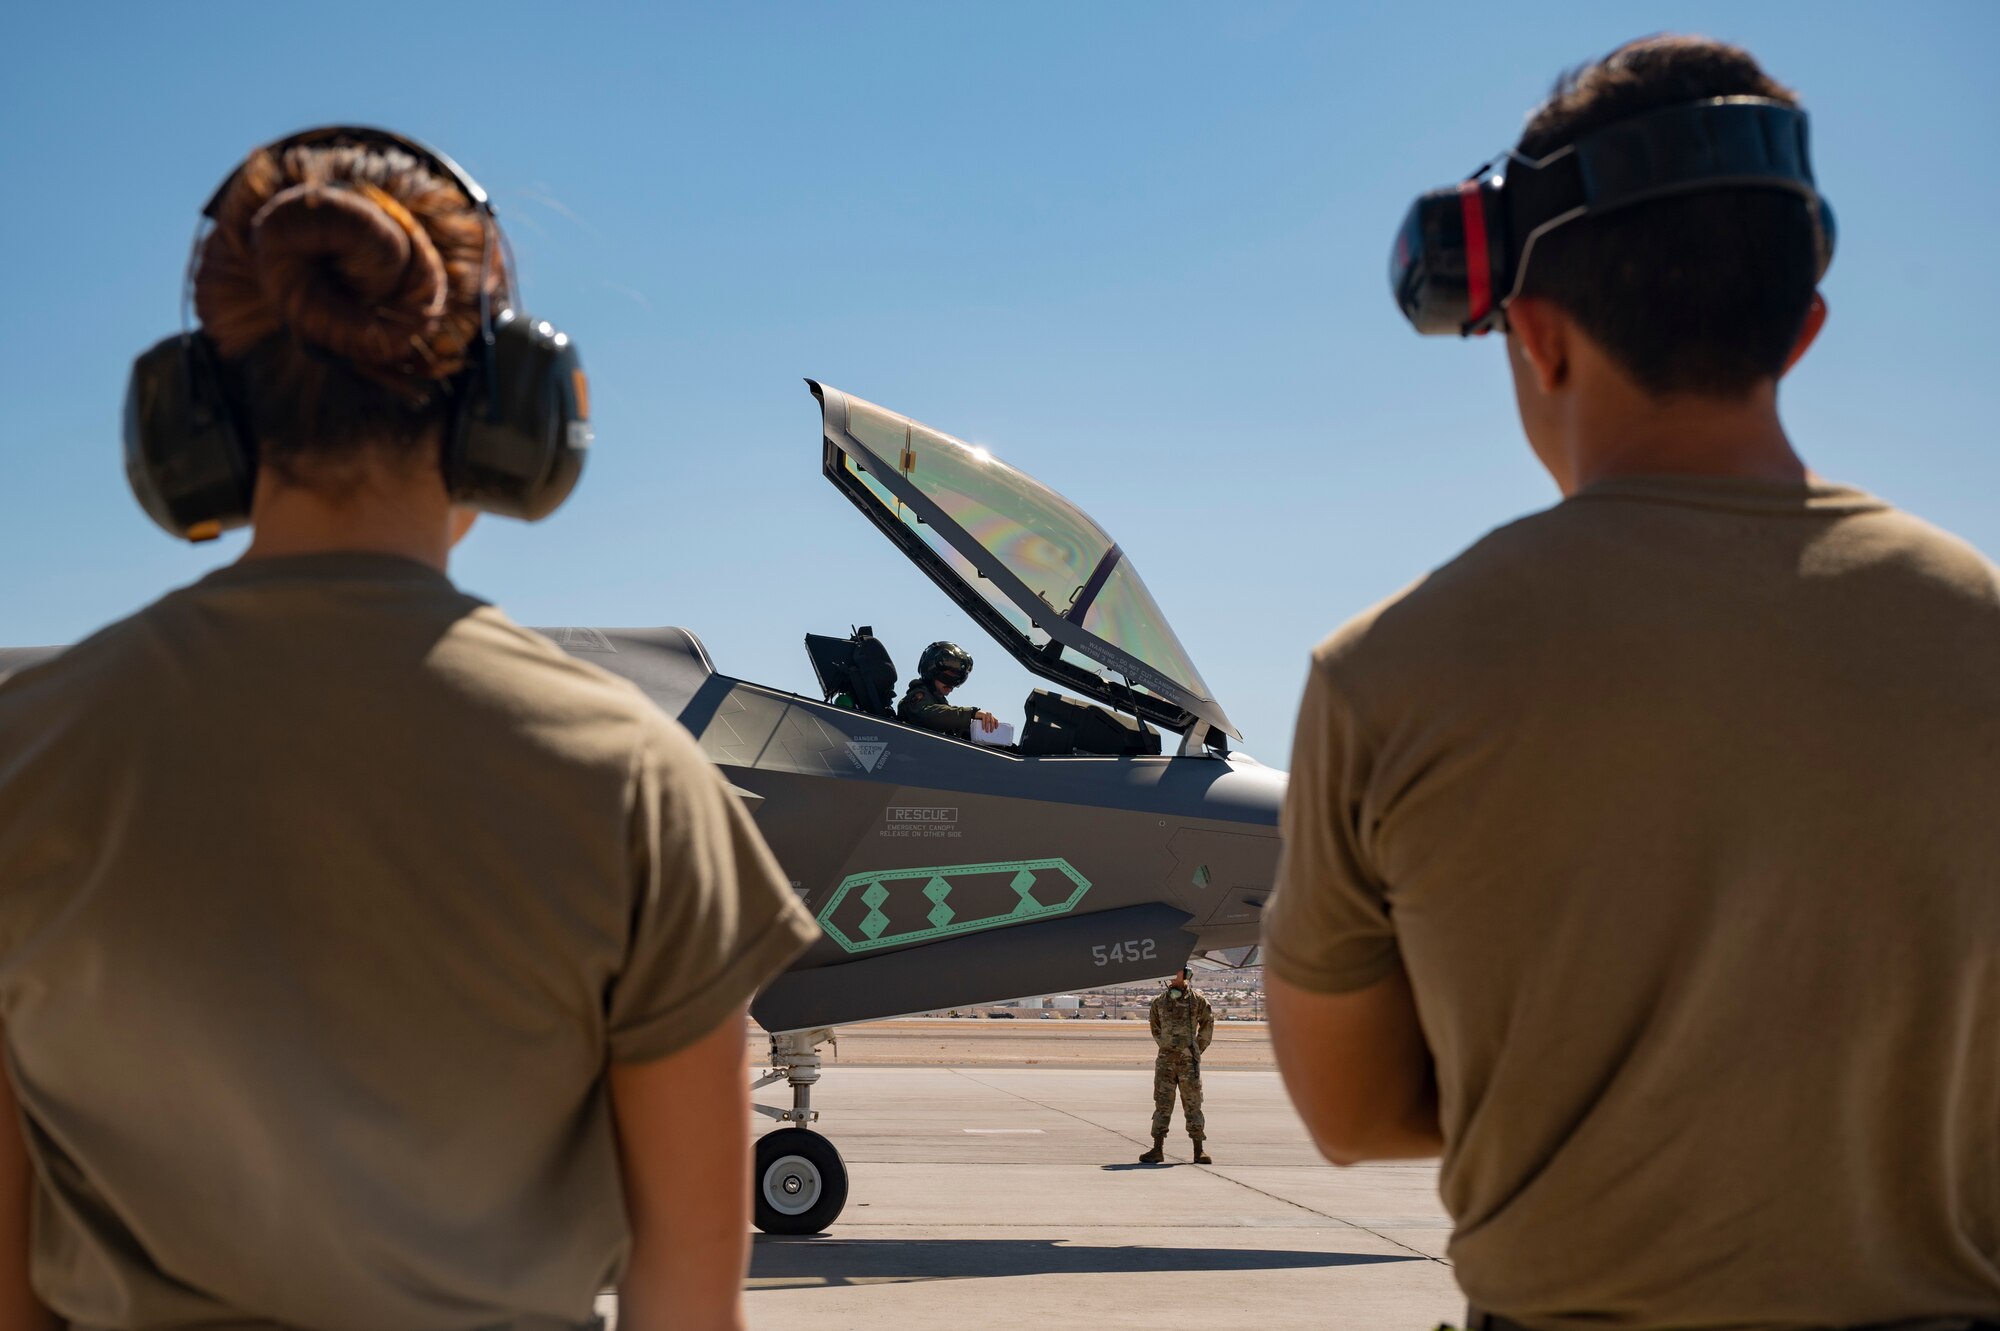 Airmen from the 926th Aircraft Maintenance Squadron  watch as an F-35A Lightning II pilot assigned to the 422nd Test and Evaluation Squadron performs pre-flight checks before launch at Nellis Air Force Base, Nevada, Sept. 21, 2021. The 442nd and 59th Test and Evaluation Squadrons led Air Combat Command’s portion of a nuclear design certification test with maintenance support from the 57th Aircraft Maintenance Squadron and Bolt Aircraft Maintenance Unit. (U.S. Air Force photo by Airman 1st Class Zachary Rufus)